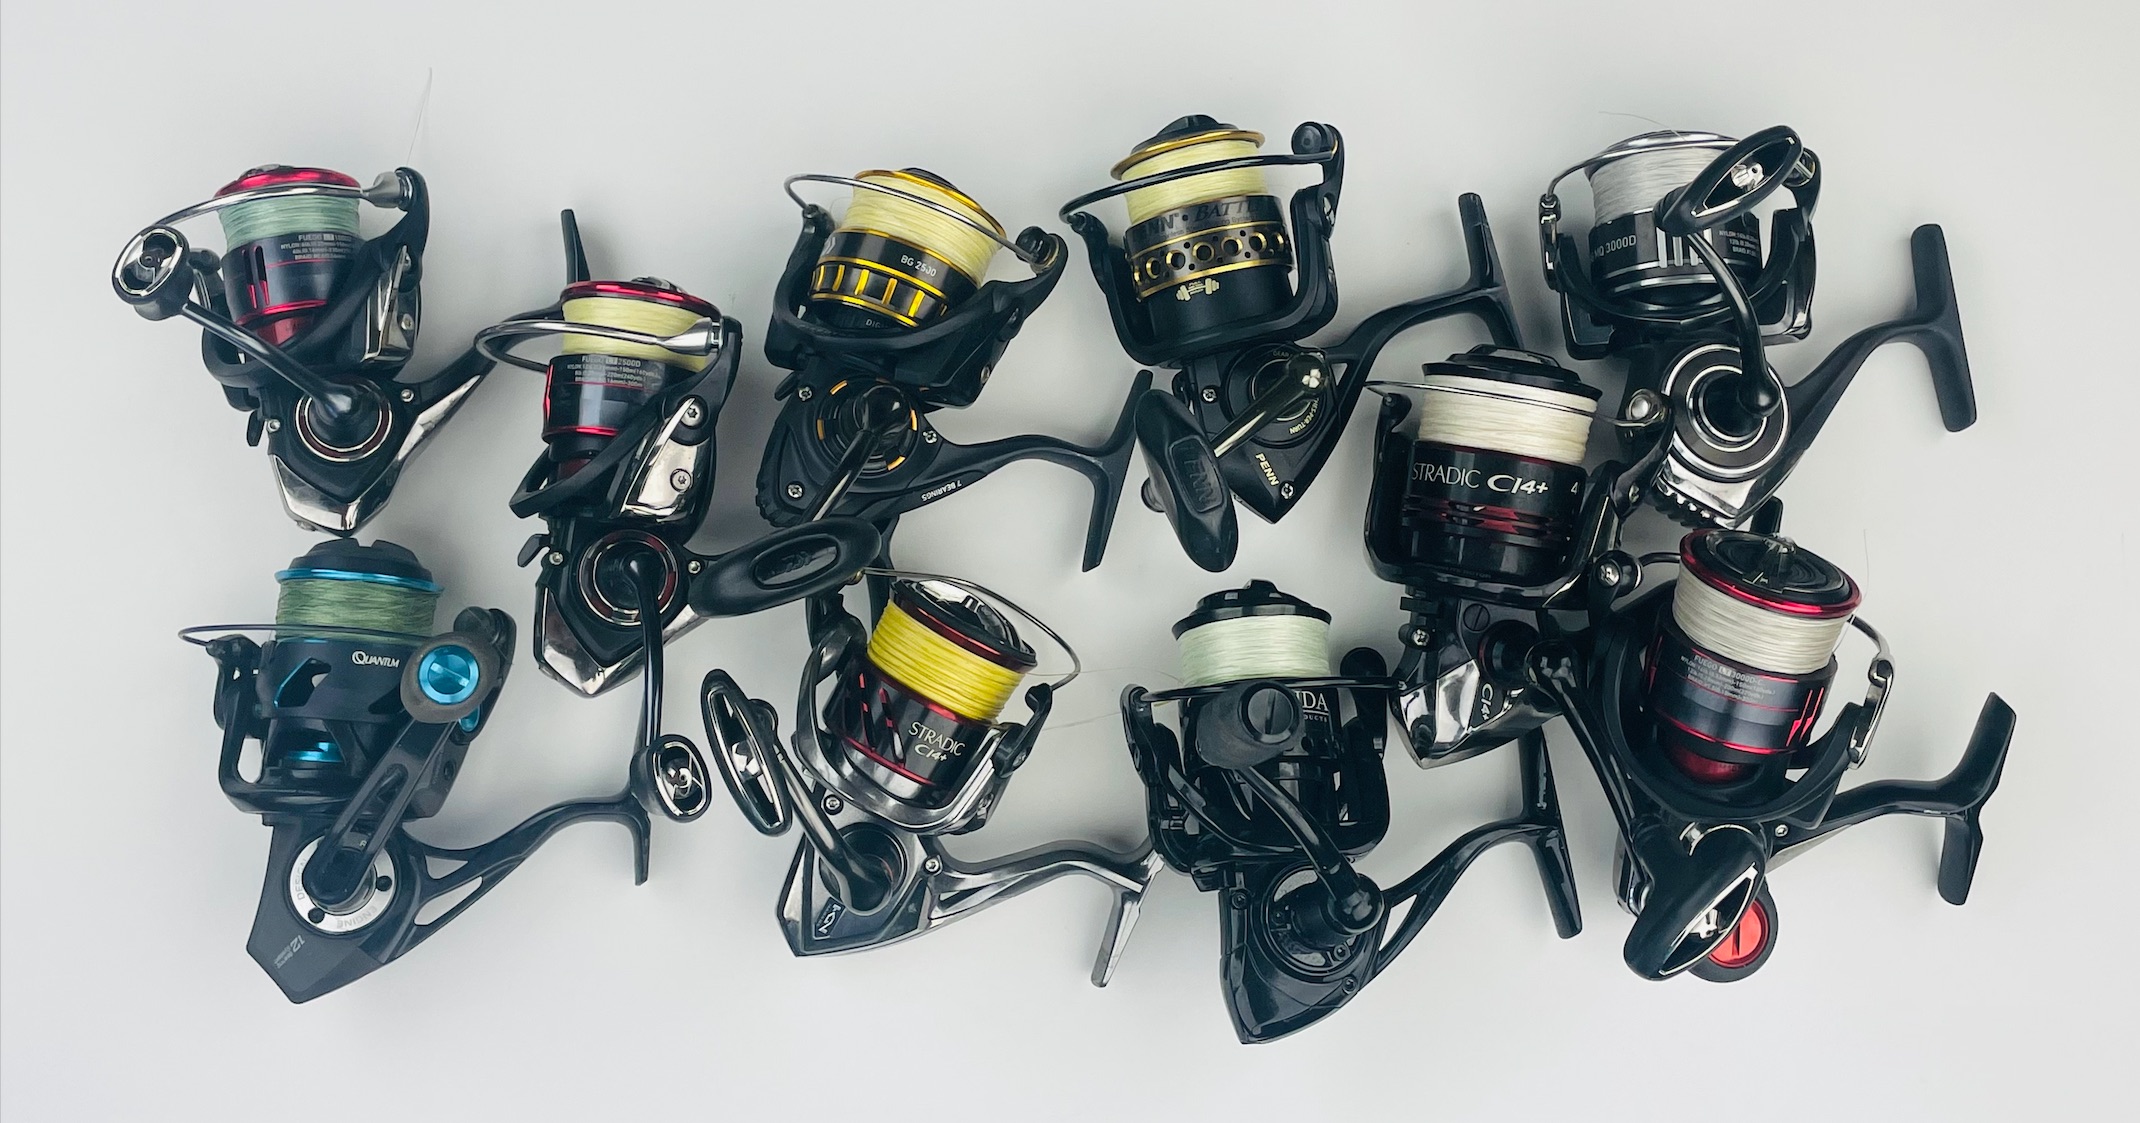 What Spinning Reel Size Is Best For Saltwater Fishing?